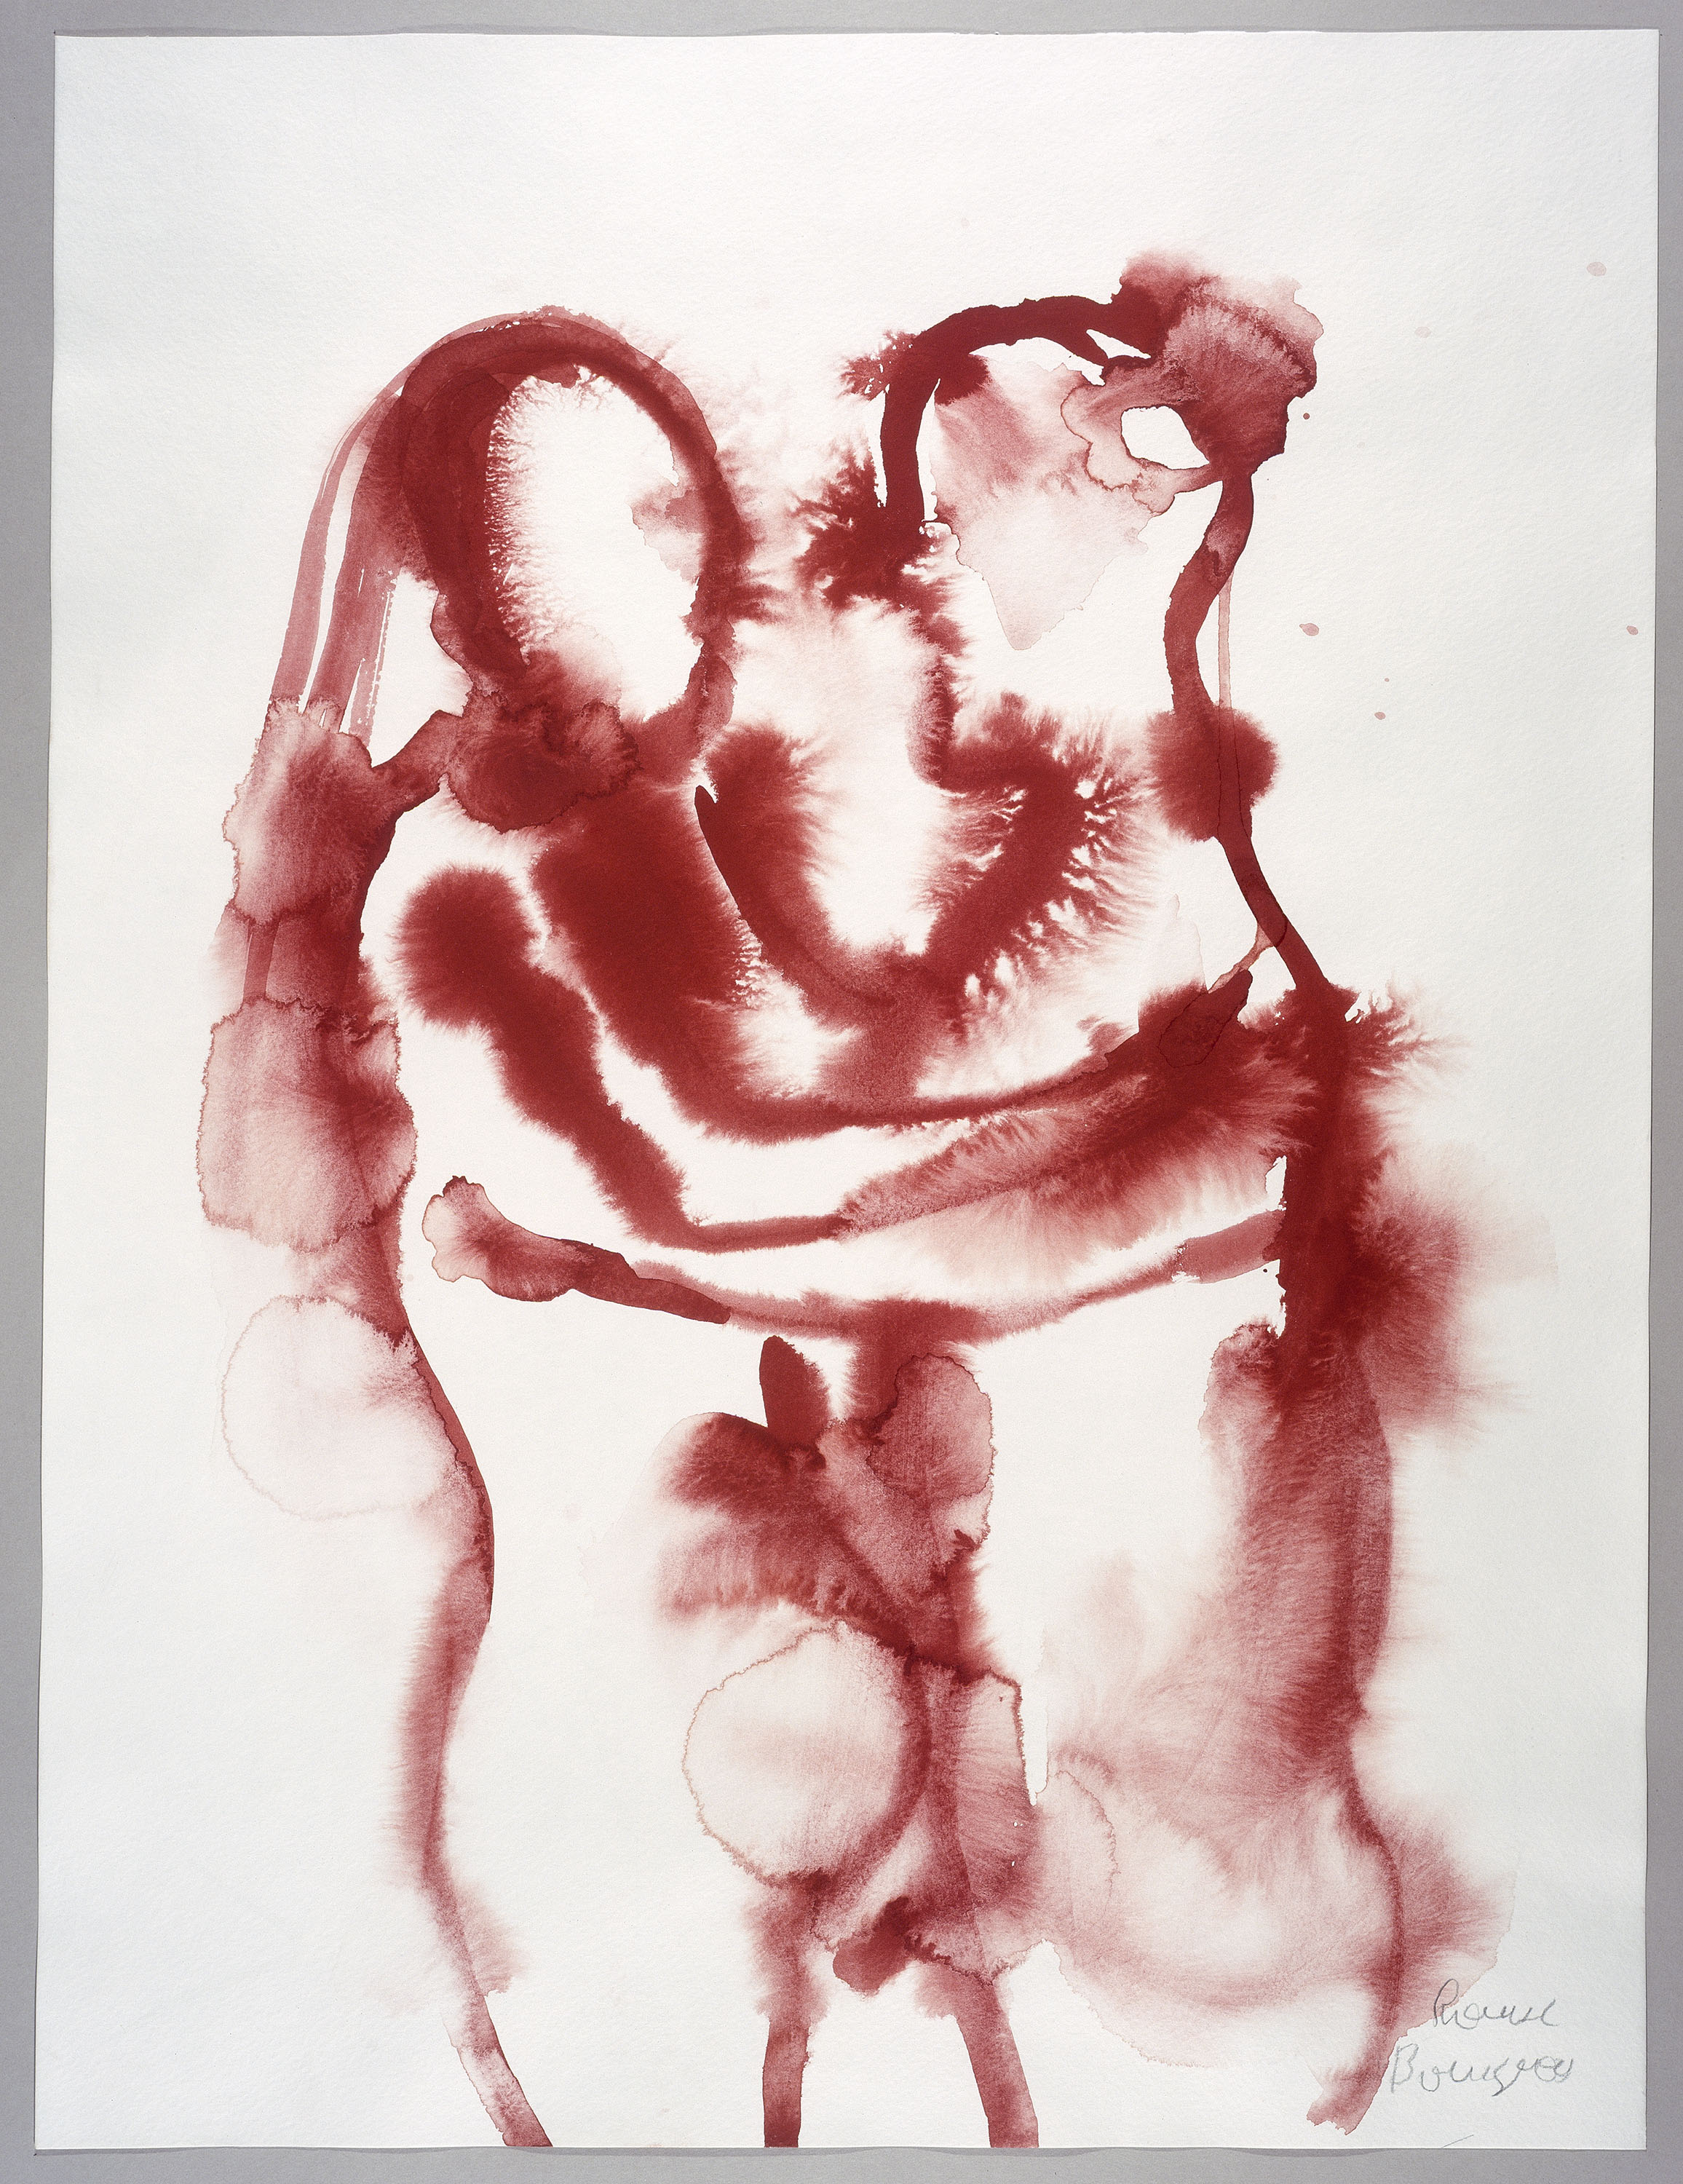 Self Portrait by Louise Bourgeois, 1990, Drypoint, etching, and